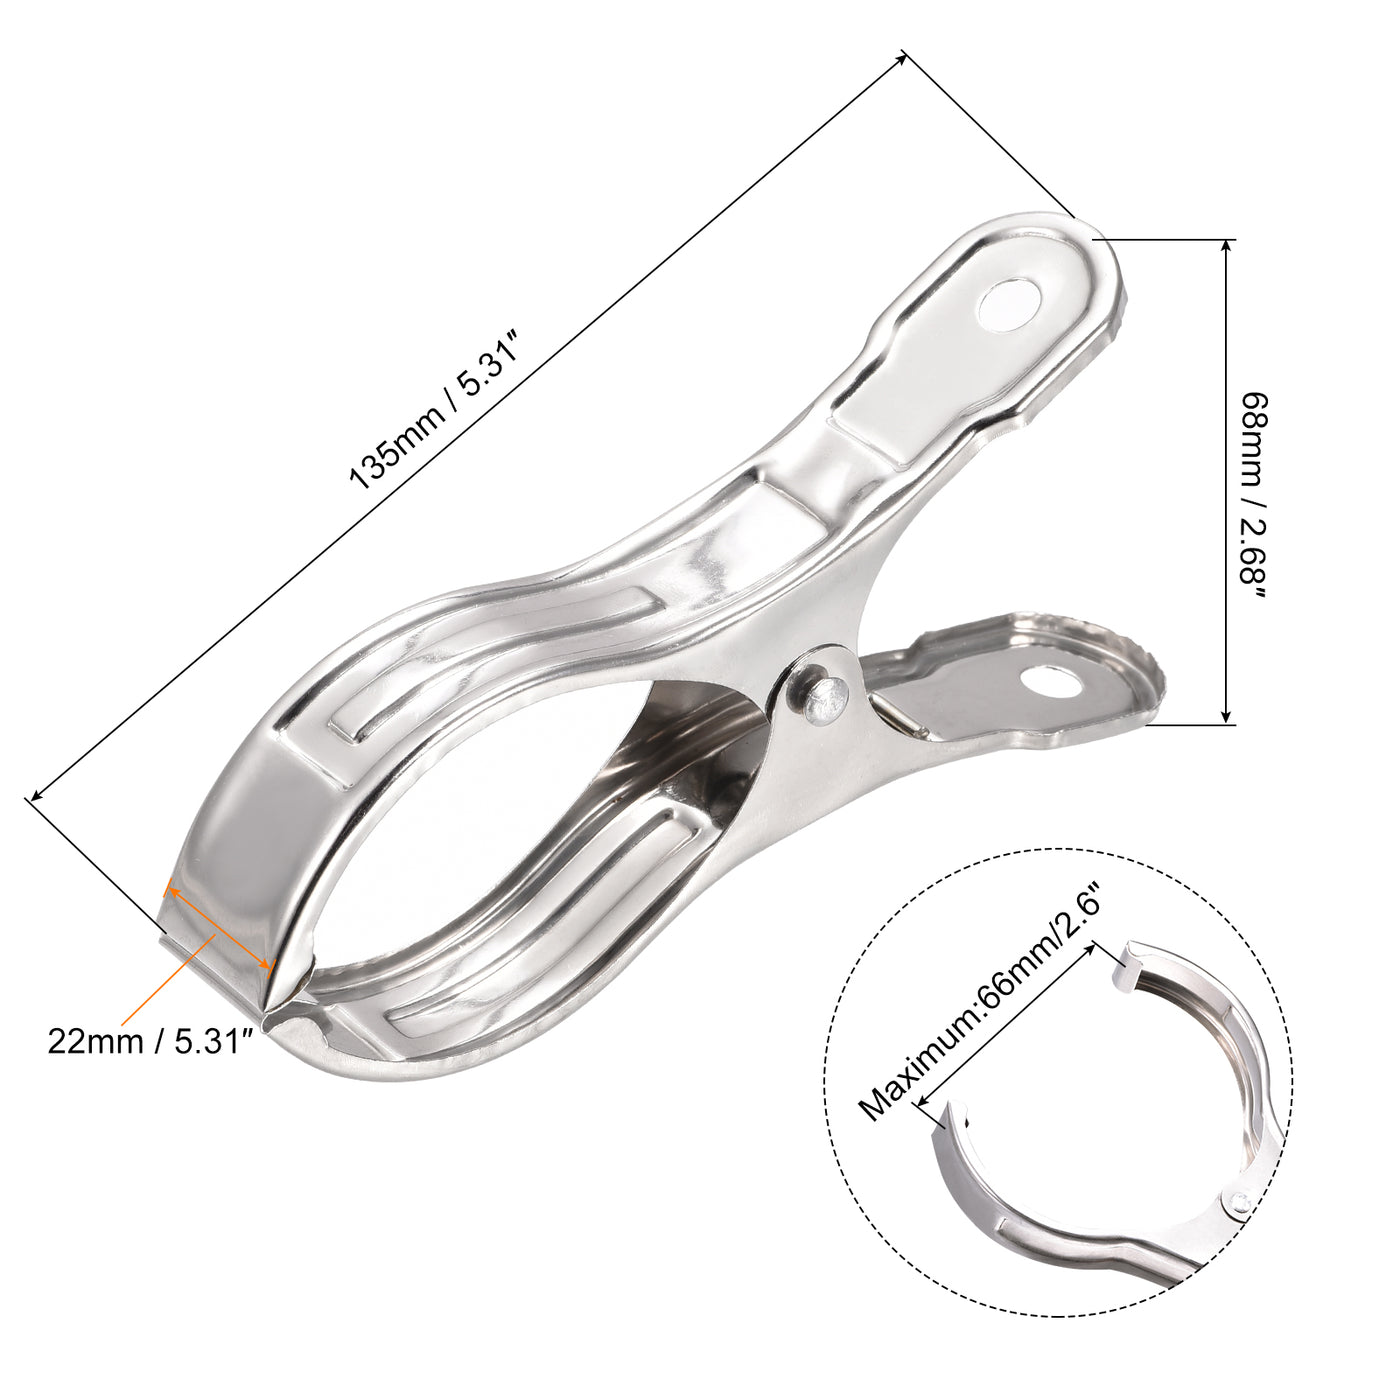 uxcell Uxcell Tablecloth Clips - 135mm Stainless Steel Clamps for Fixing Table Cloth Hanging Clothes, 4 Pcs